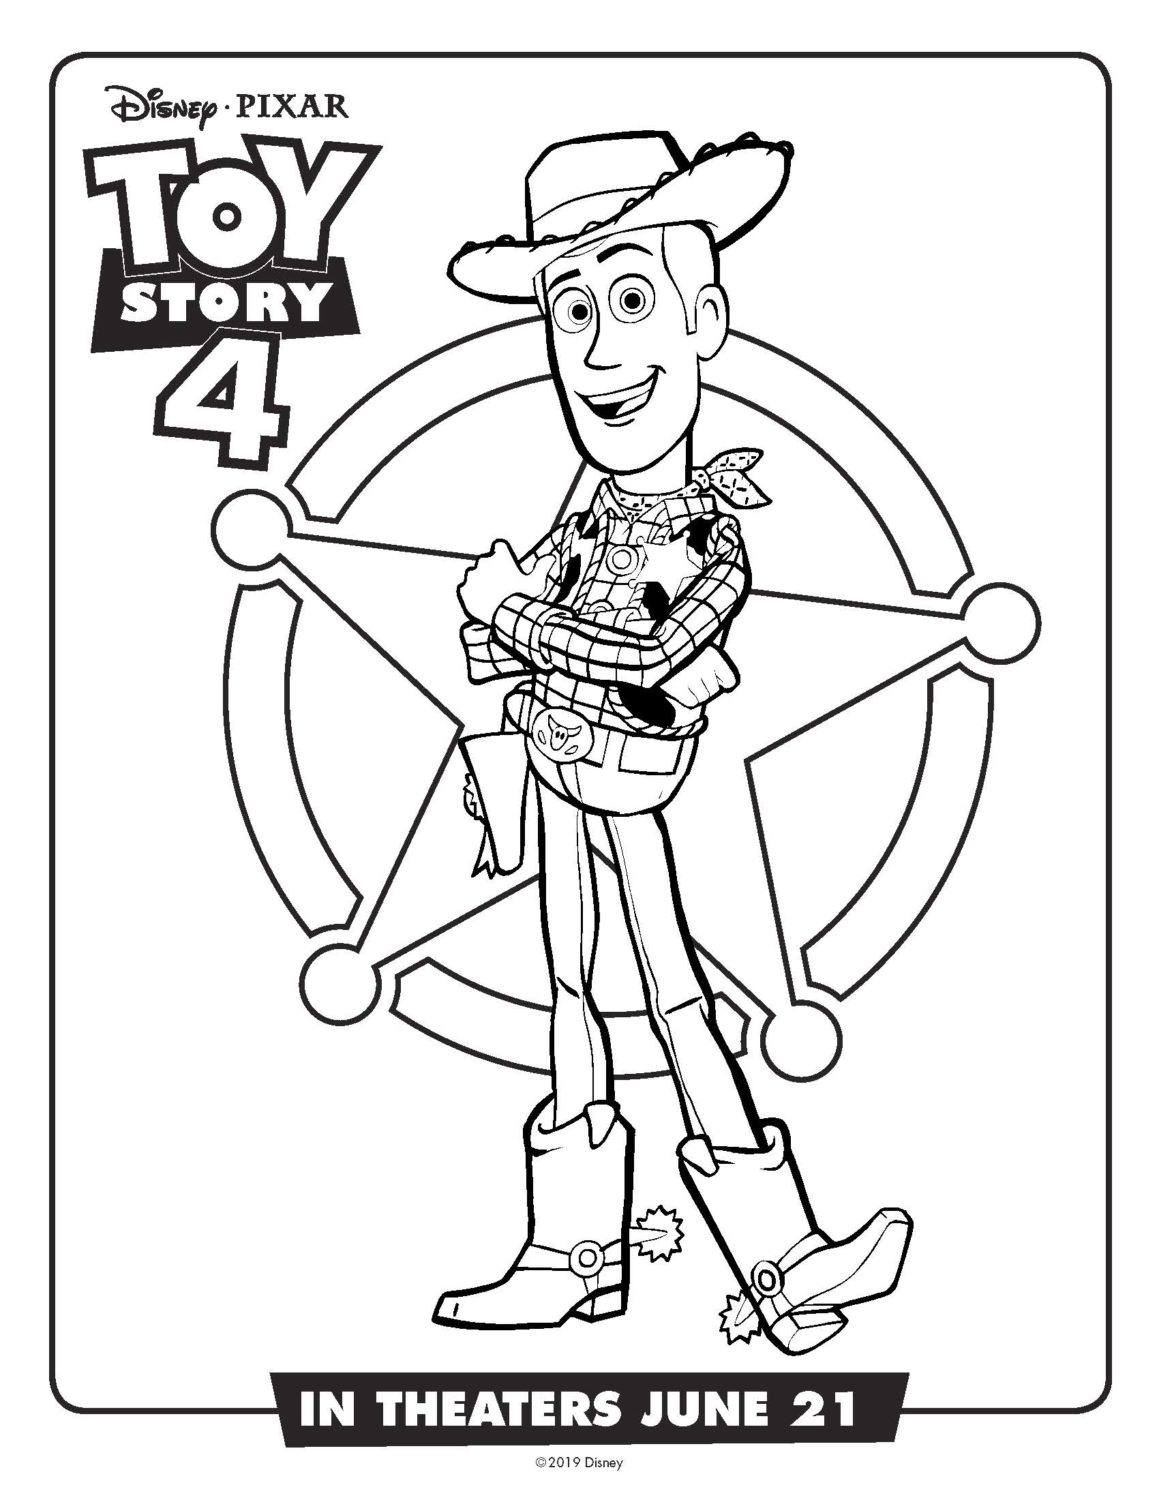 Free Printable Toy Story 4 Coloring Pages and Activity ...